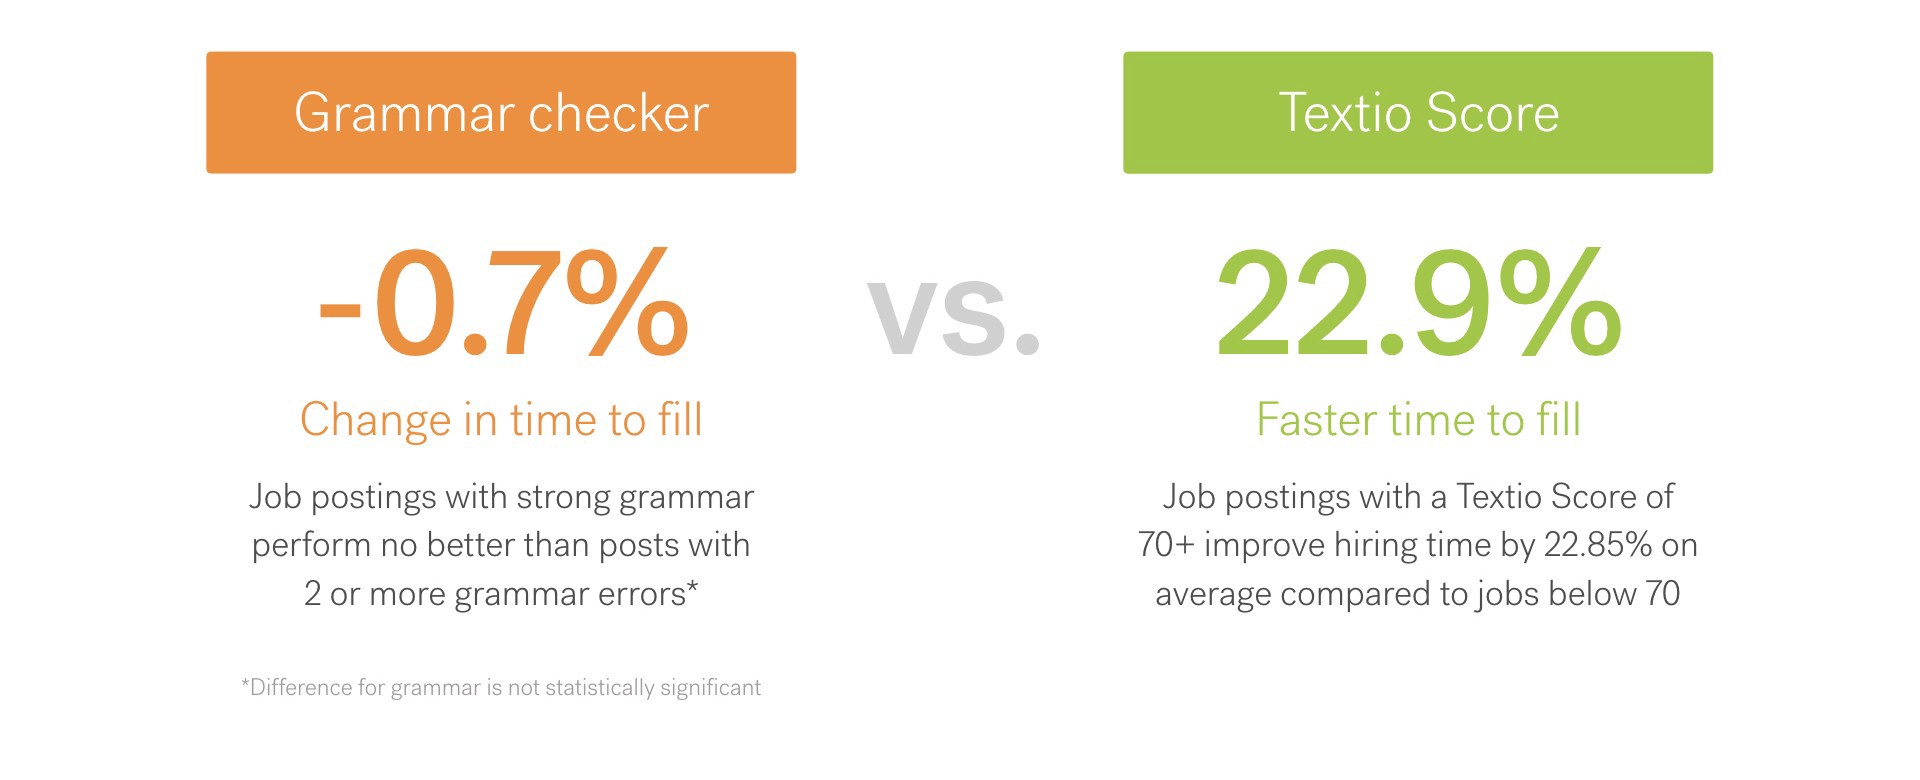 Impact of having good grammar vs a high Textio Score, three is no advantage in the time to fill your jobs simply by correcting your grammar but you can decrease your time to fill by 22.9%